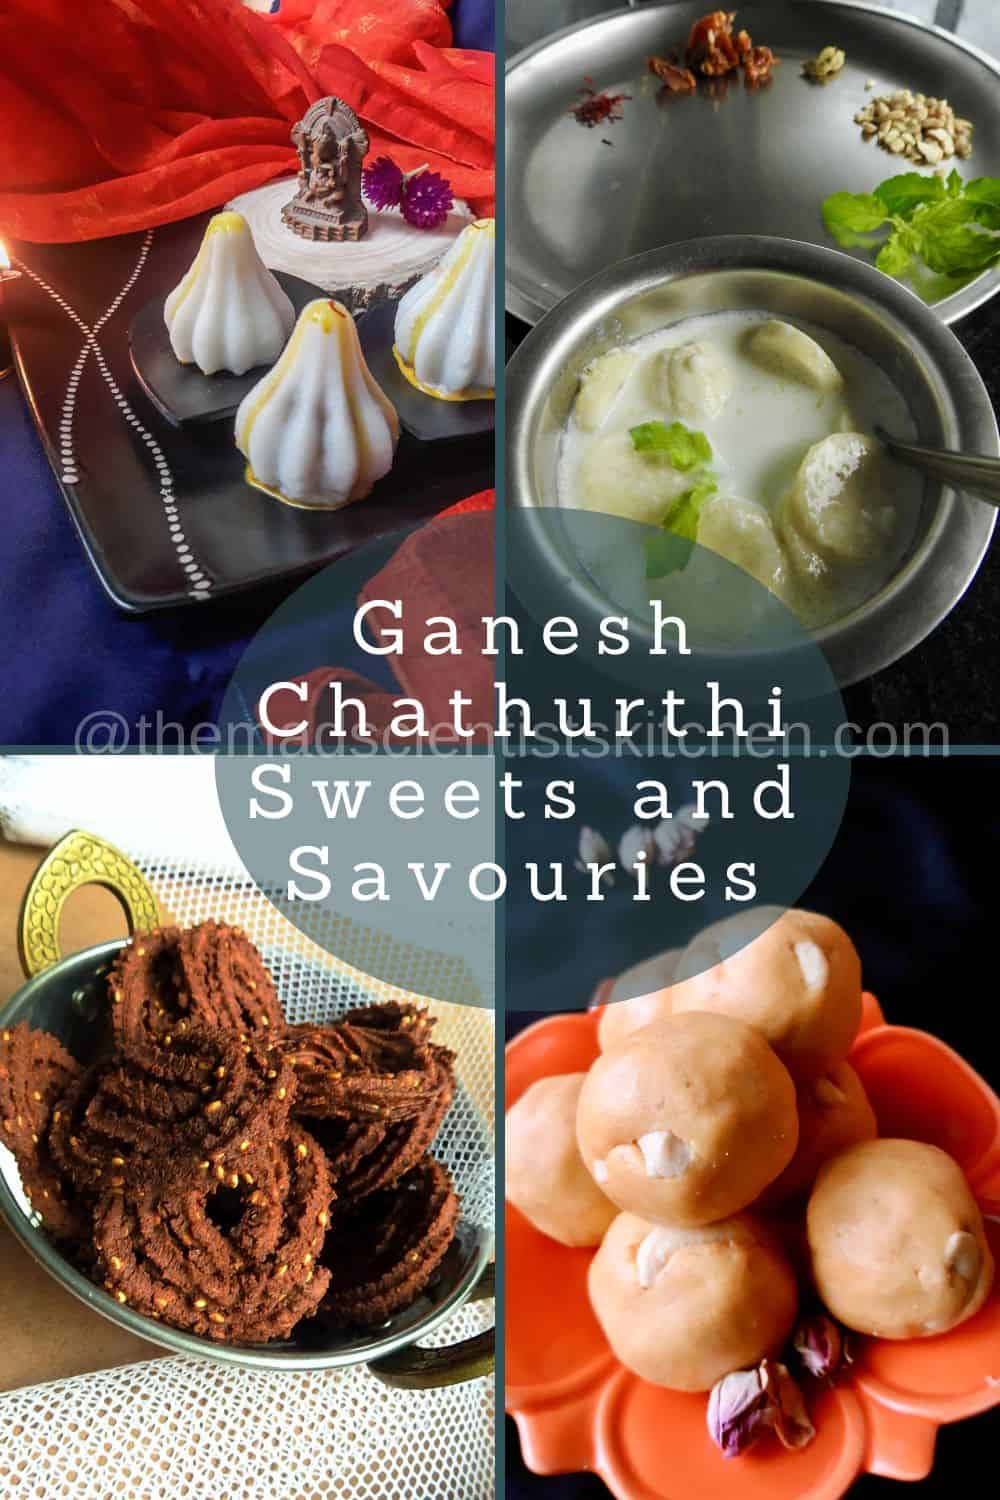 My list of sweets and savouries for Ganesh Festival.